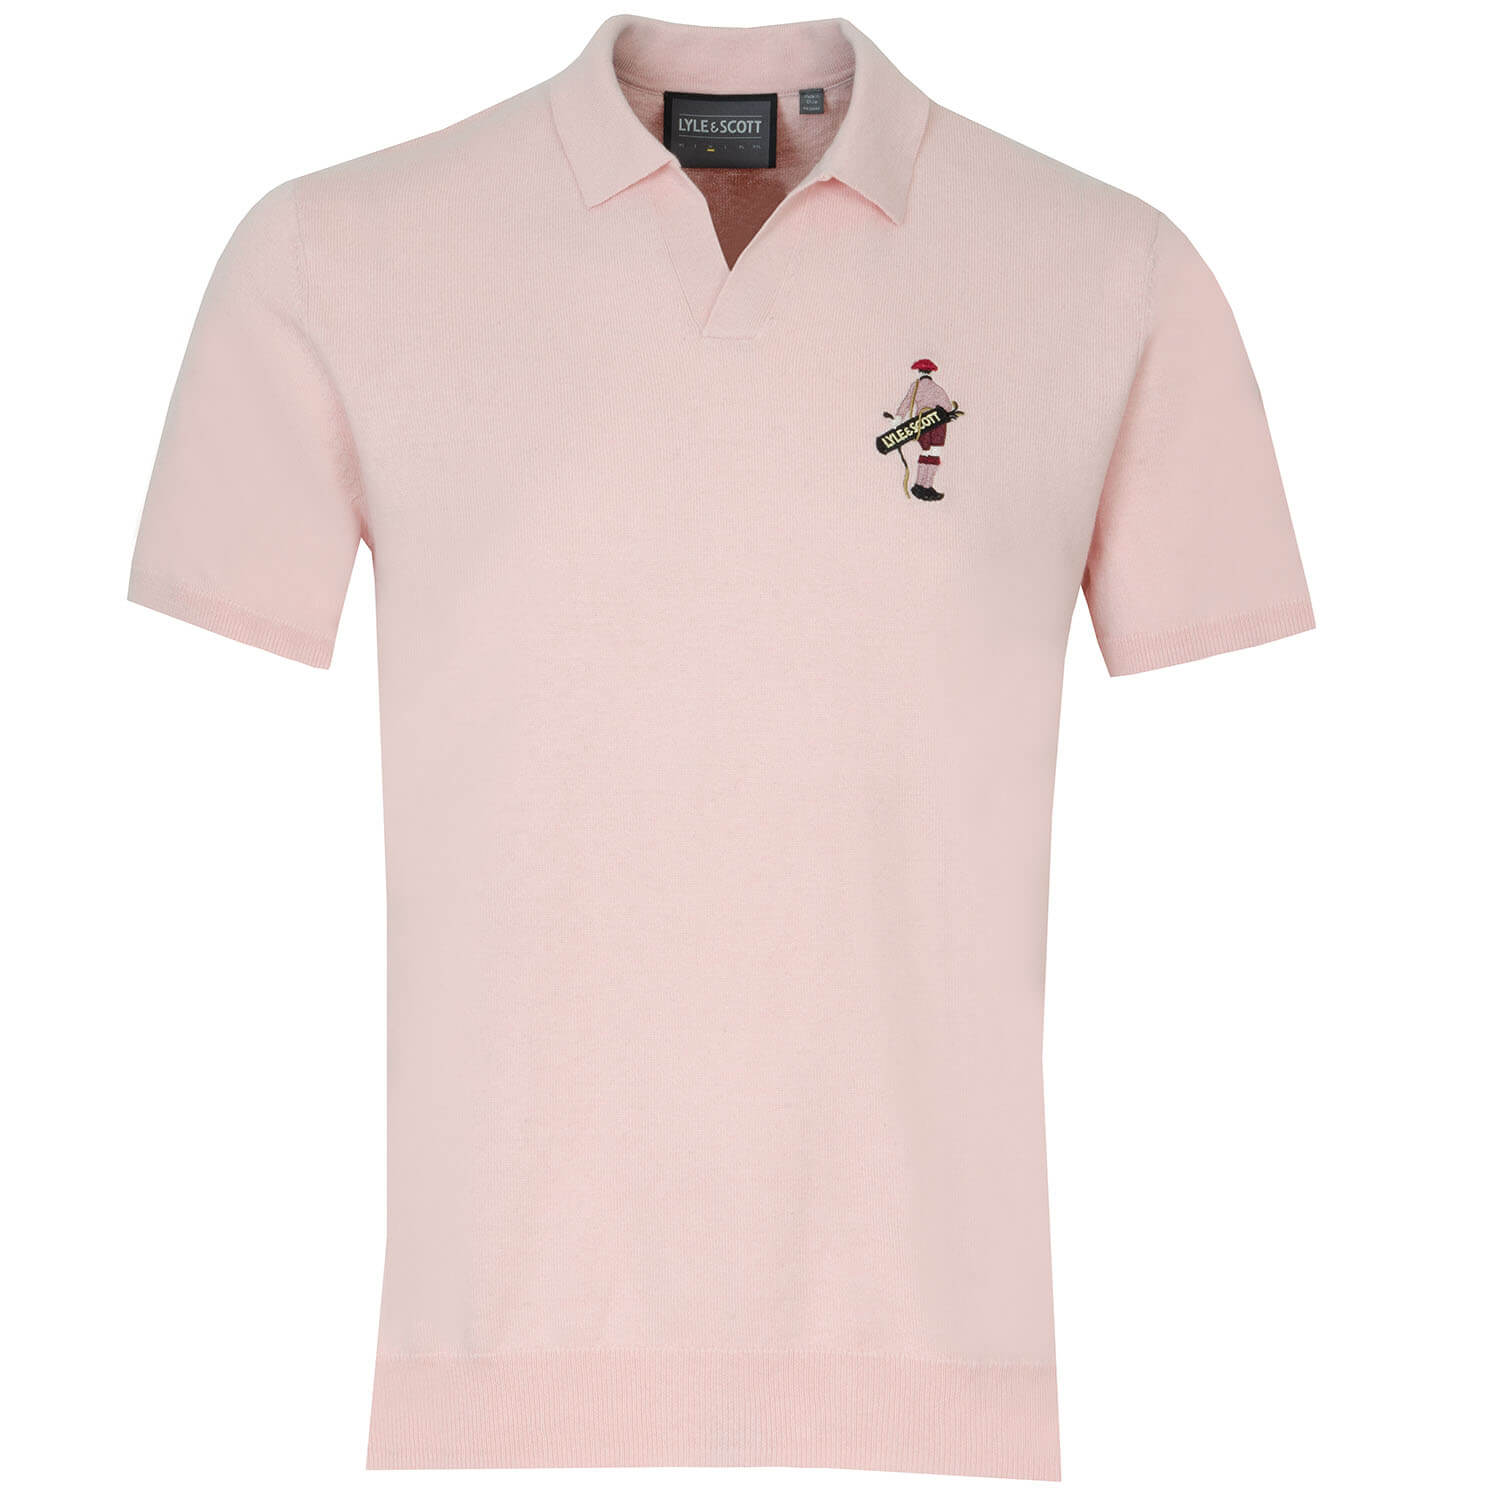 Lyle & Scott Player Knitted Polo Shirt